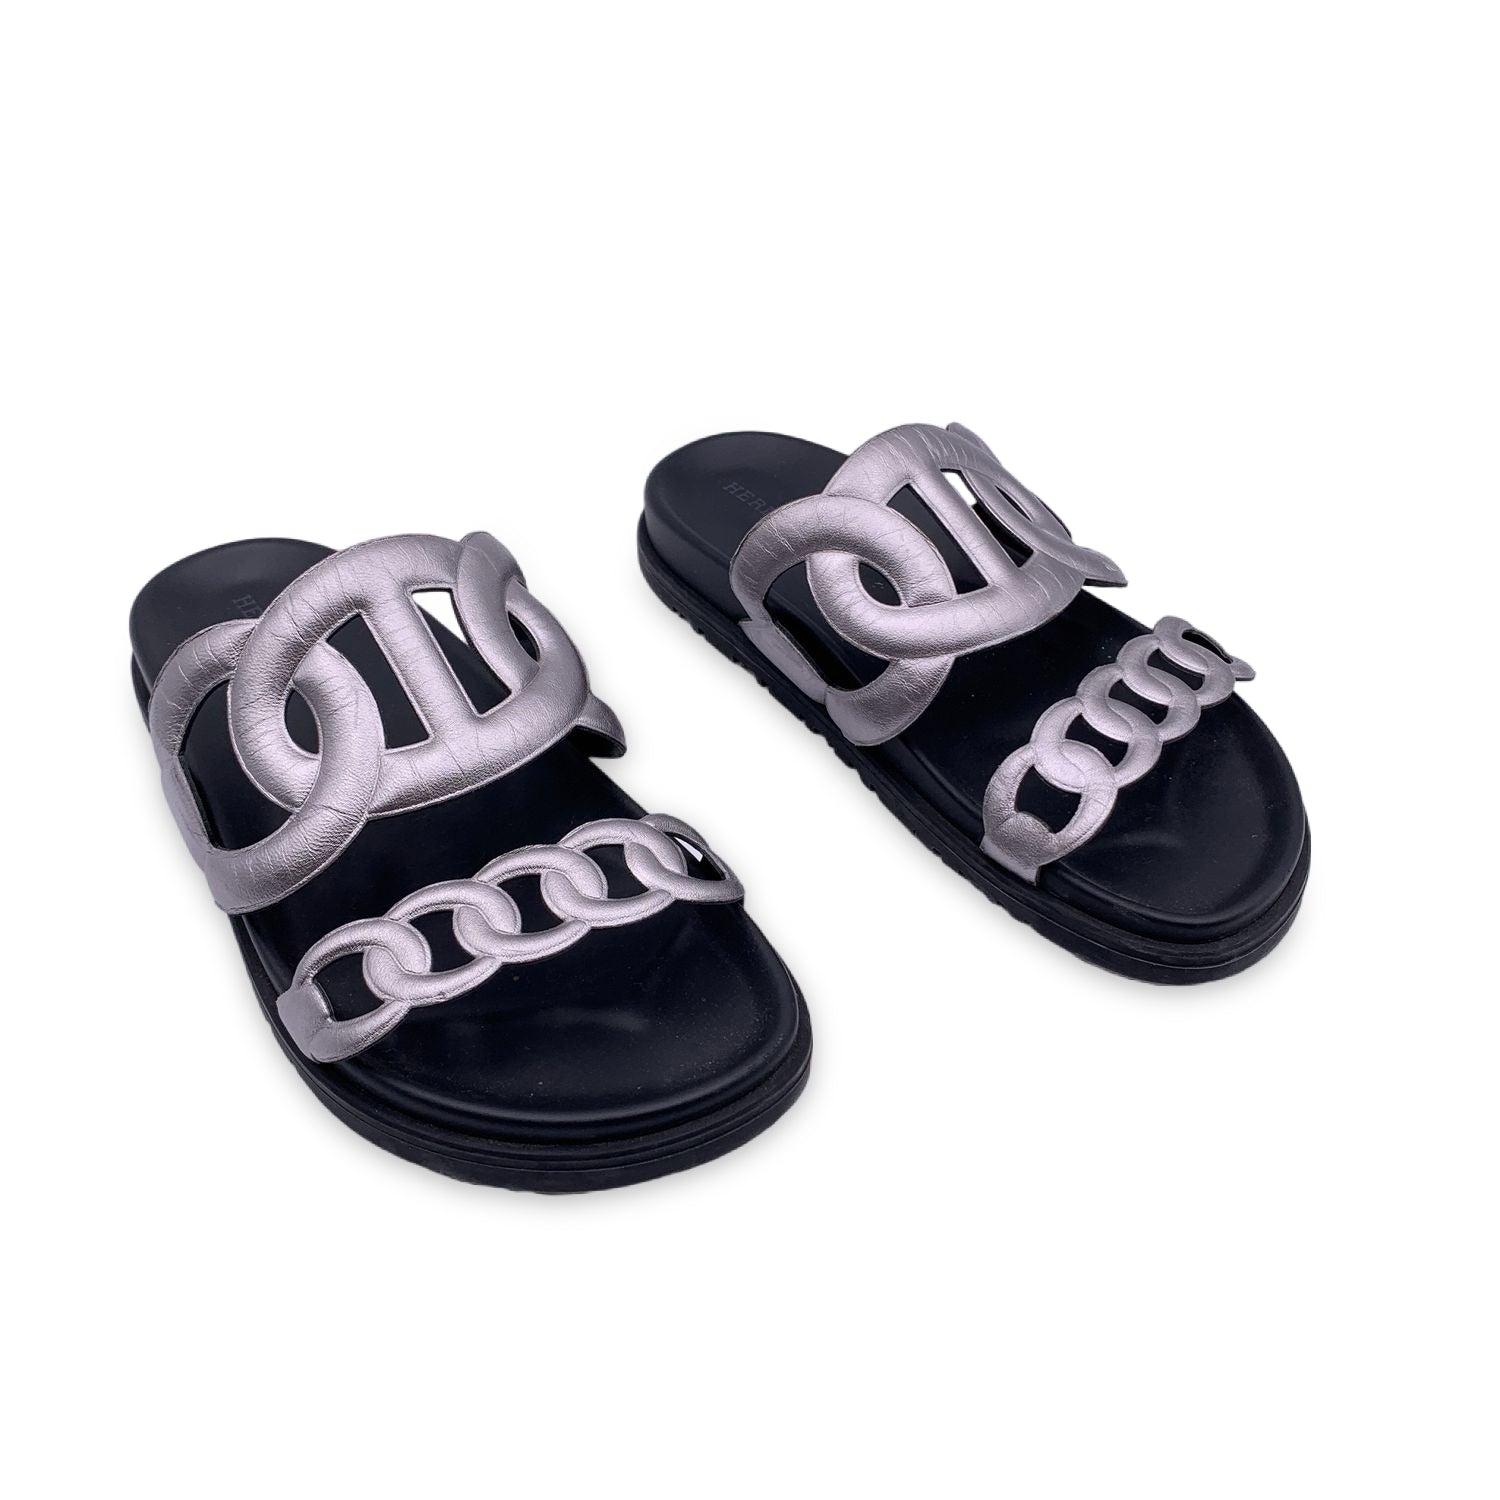 Hermès Extra slide sandals. Silver metal leather upper. Chaine d'Ancre inspired straps. Anatomical rubber sole. Size 37. Foot lenght: 9 inches - 23 cm Details MATERIAL: Leather COLOR: Silver MODEL: Extra GENDER: Women COUNTRY OF MANUFACTURE: Italy